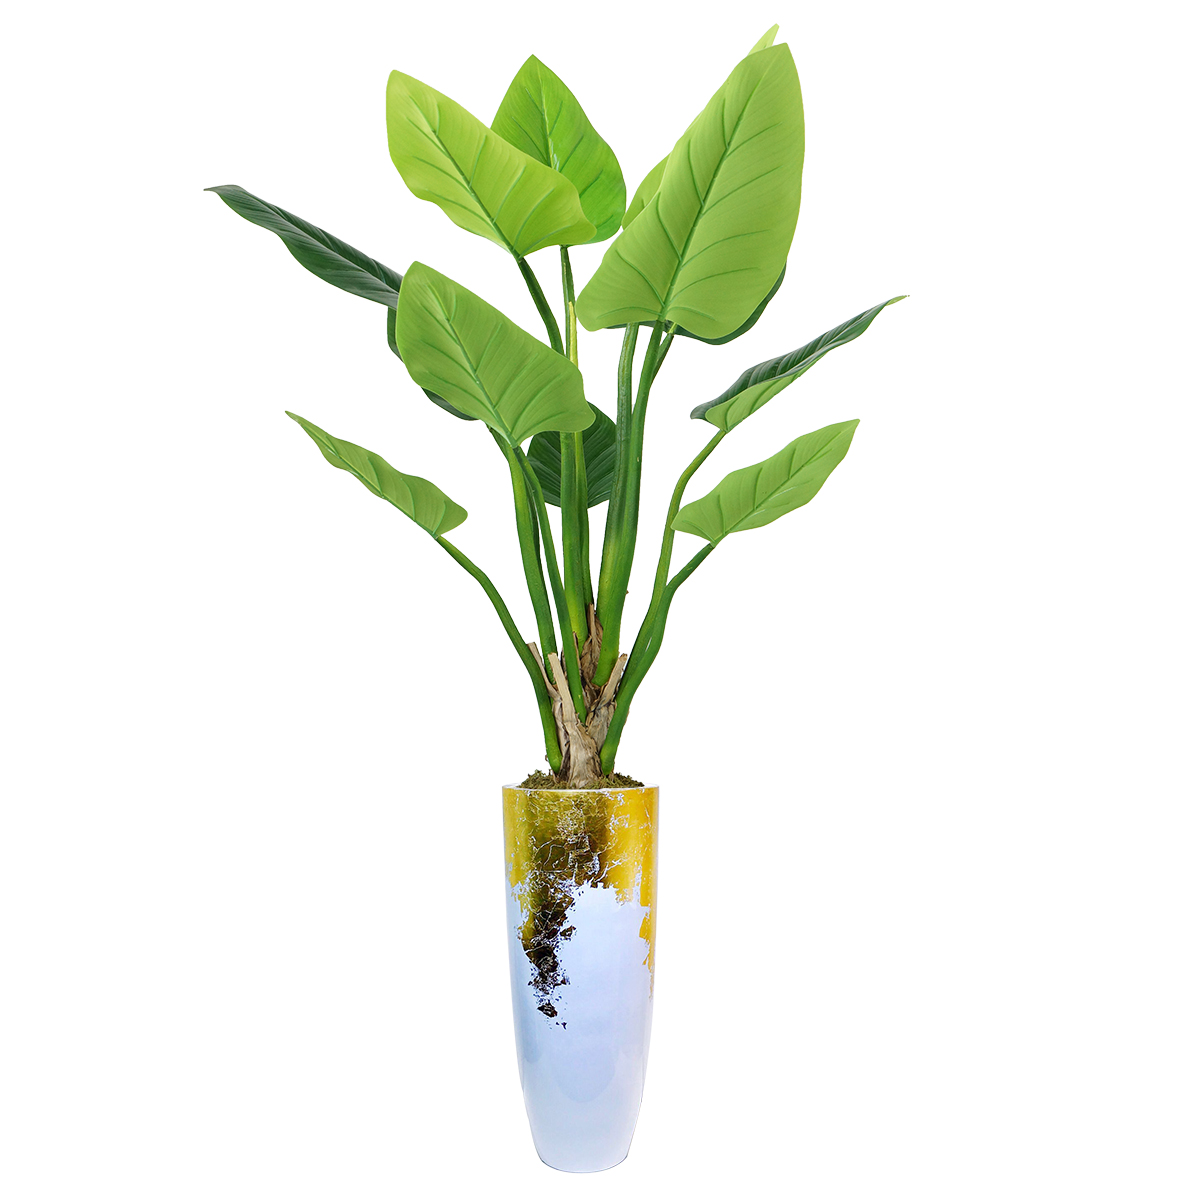 Vhx136221 84.5 In. Philodendron Erubescens Green Emerald Plant In Resin Planter